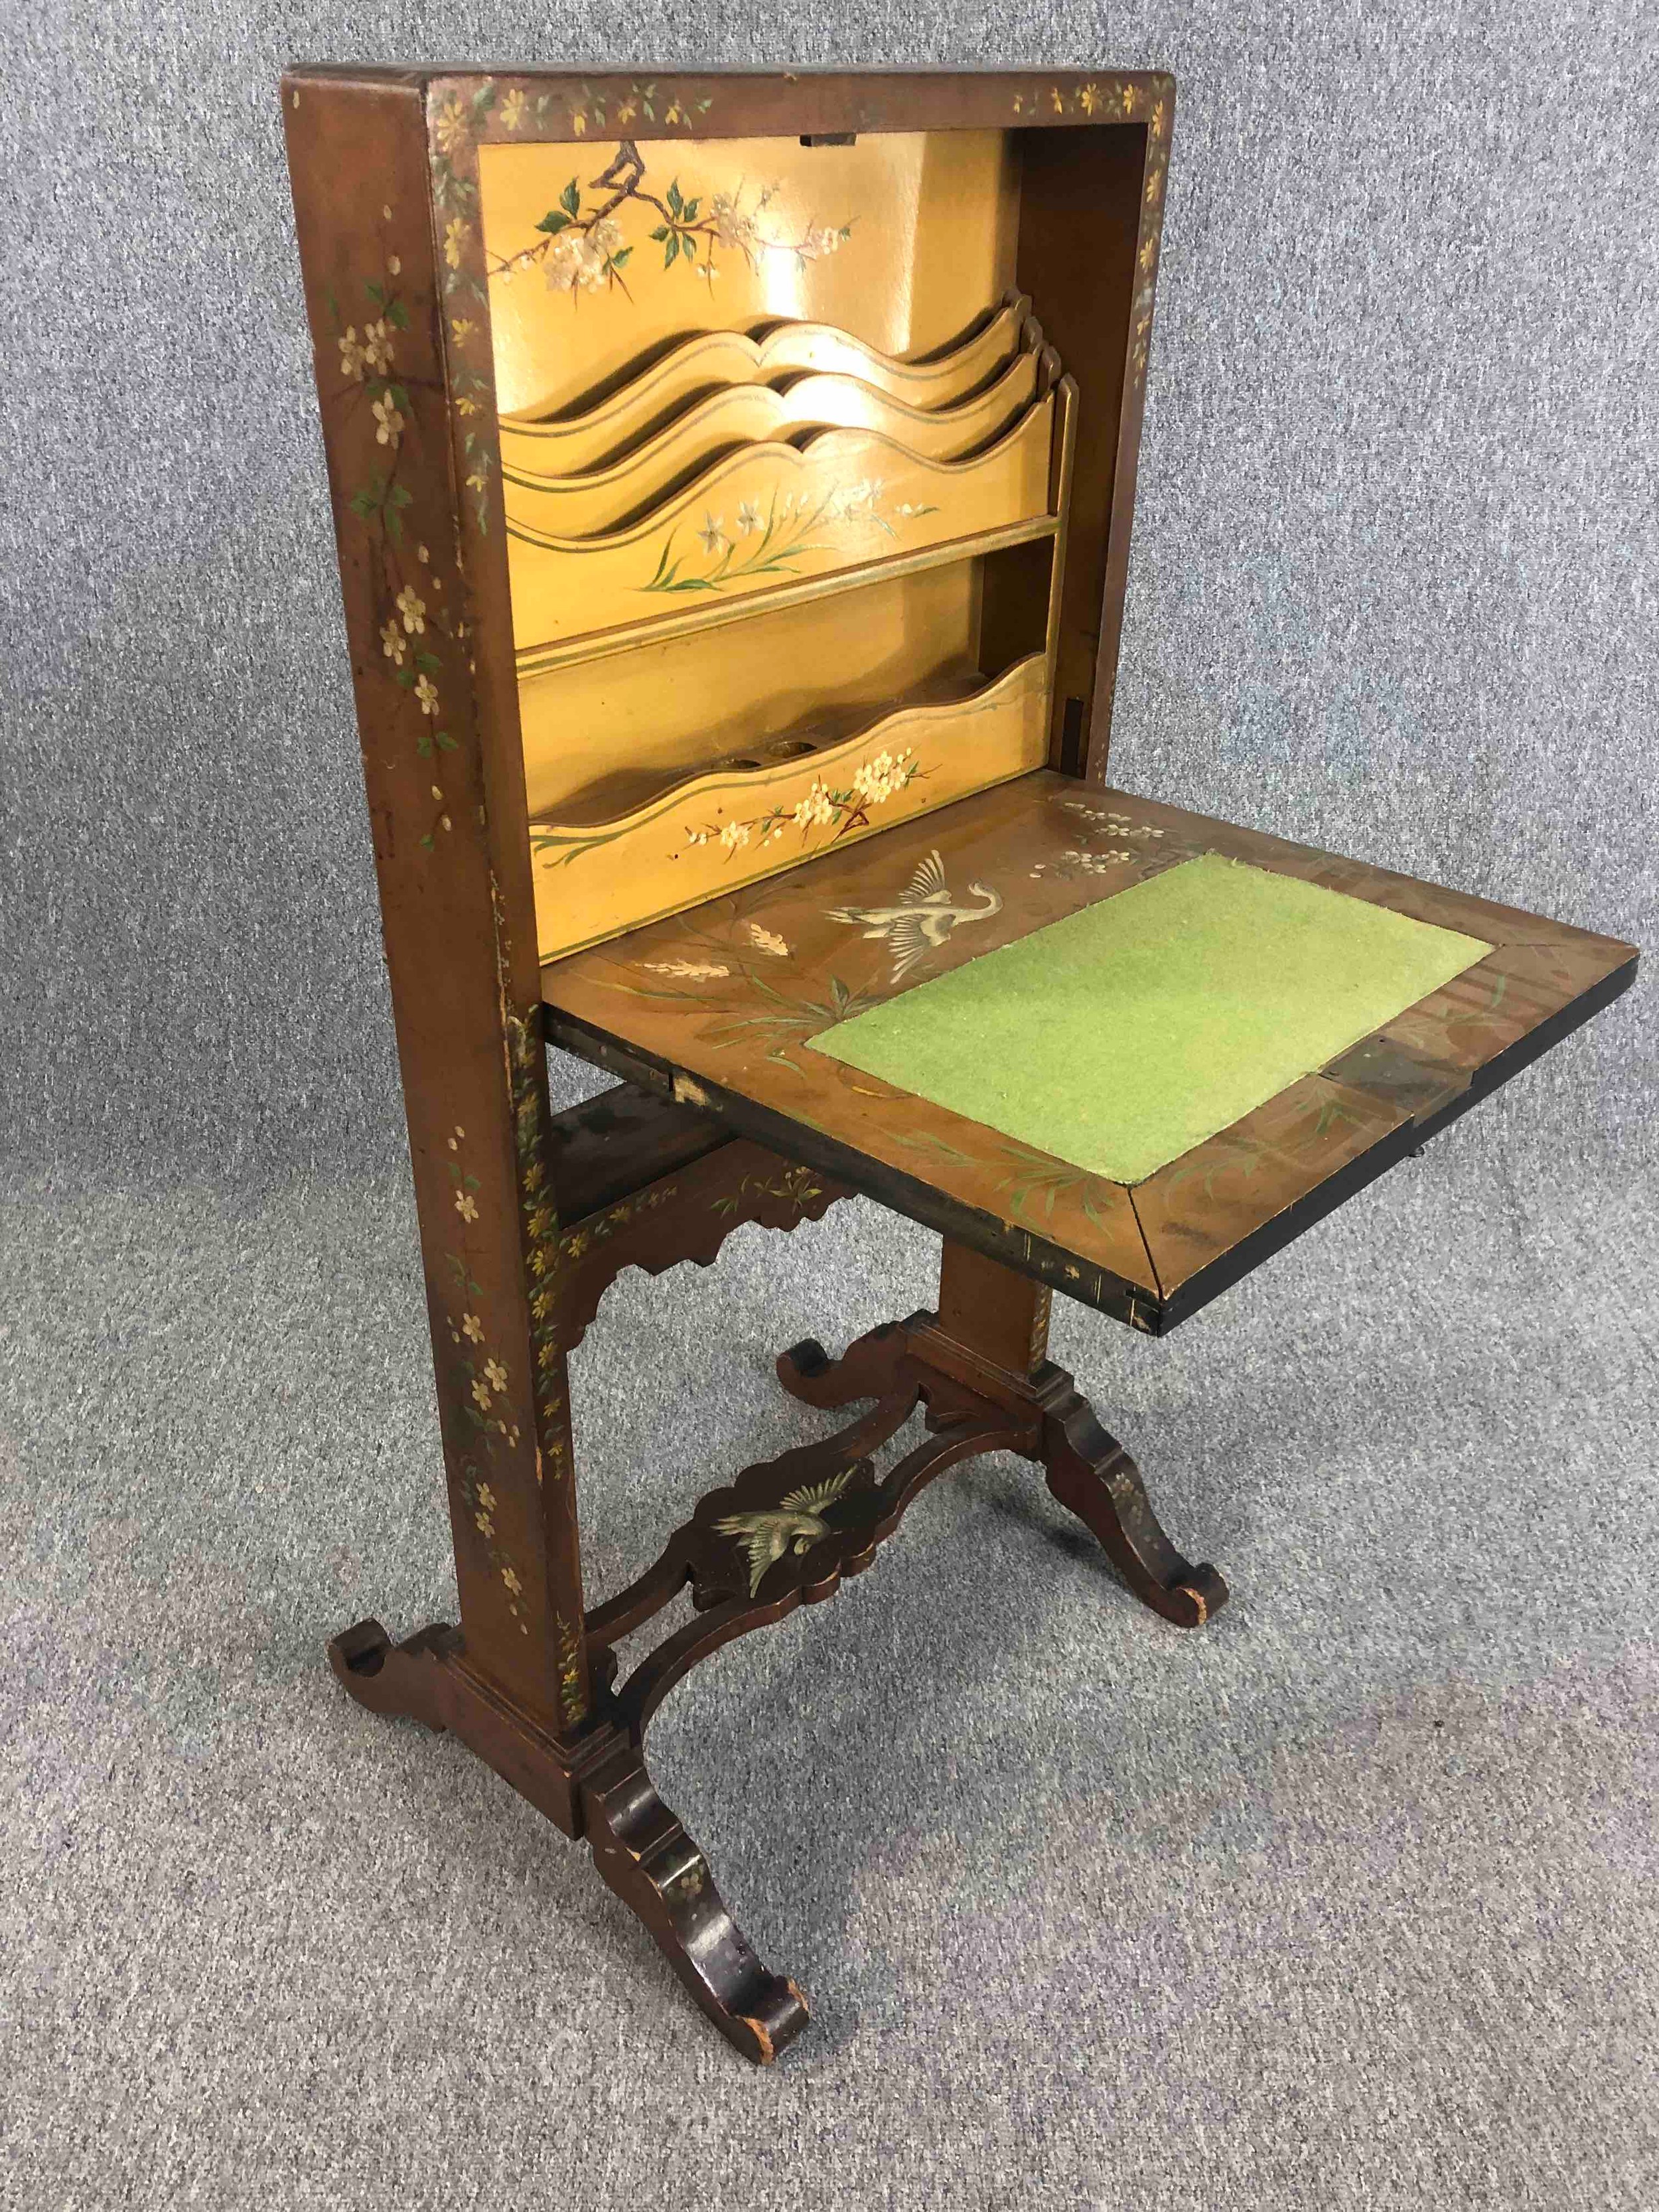 A late 19th century Chinoiserie decorated and lacquered secretaire screen with fall front - Image 6 of 9